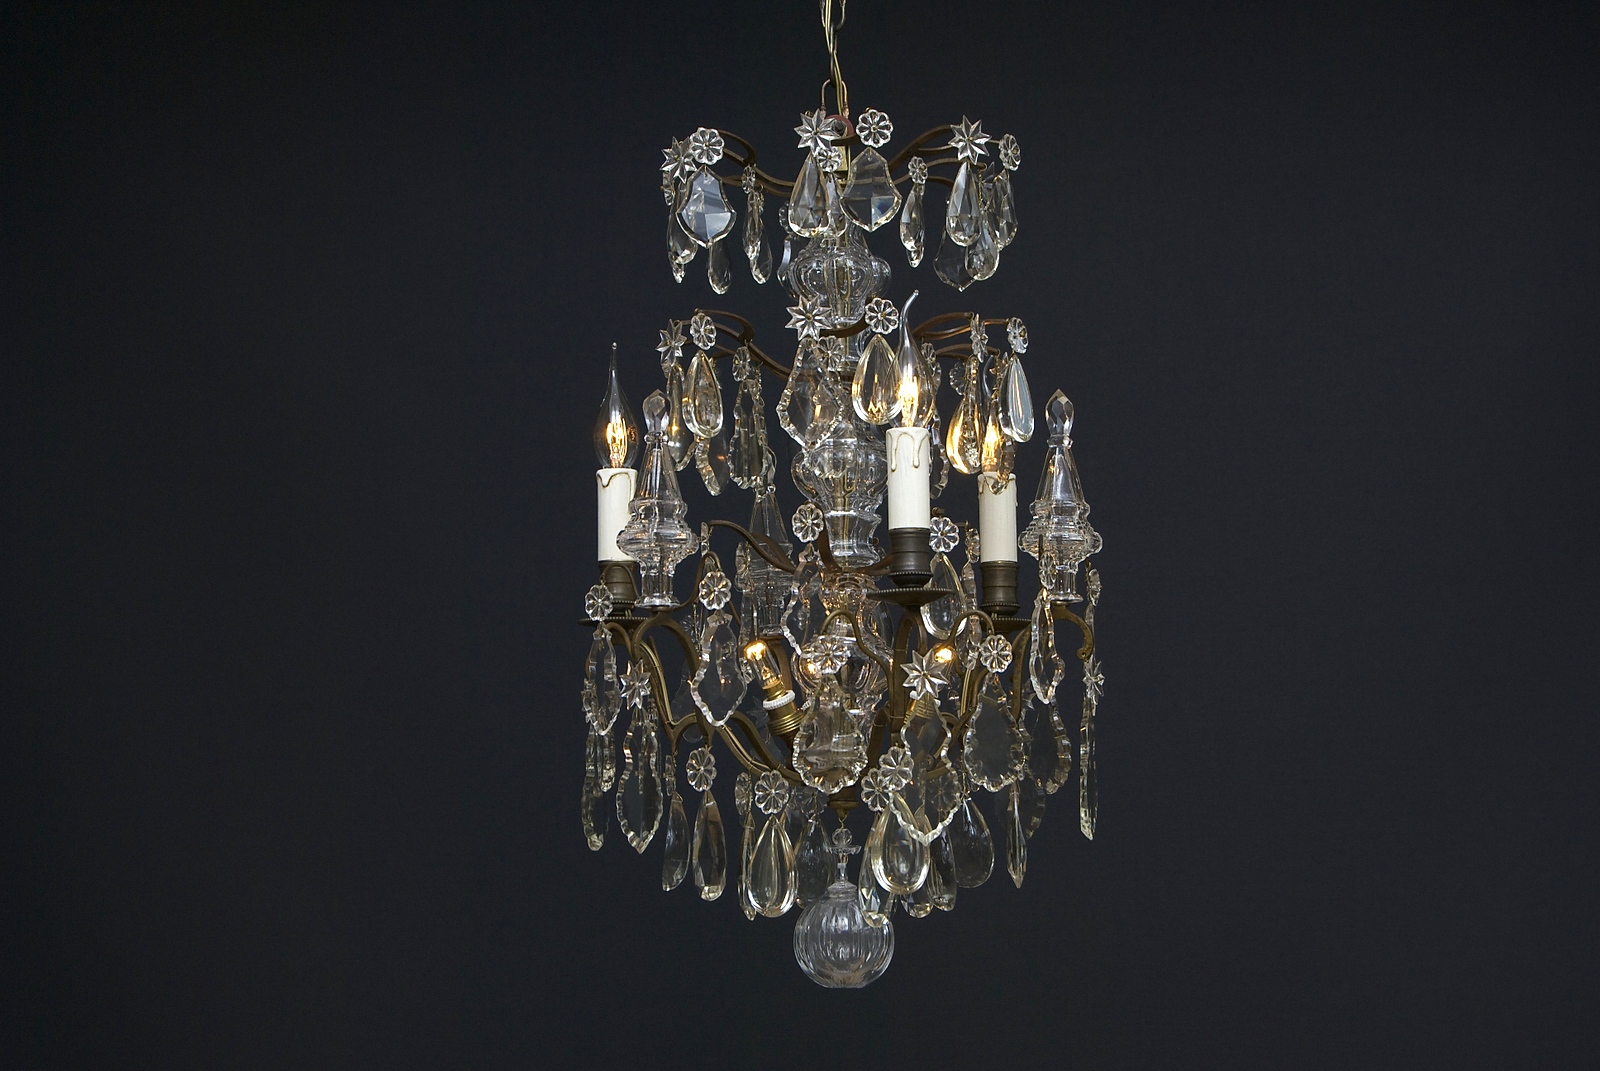 Late 19th century French crystal chandelier with 6 light